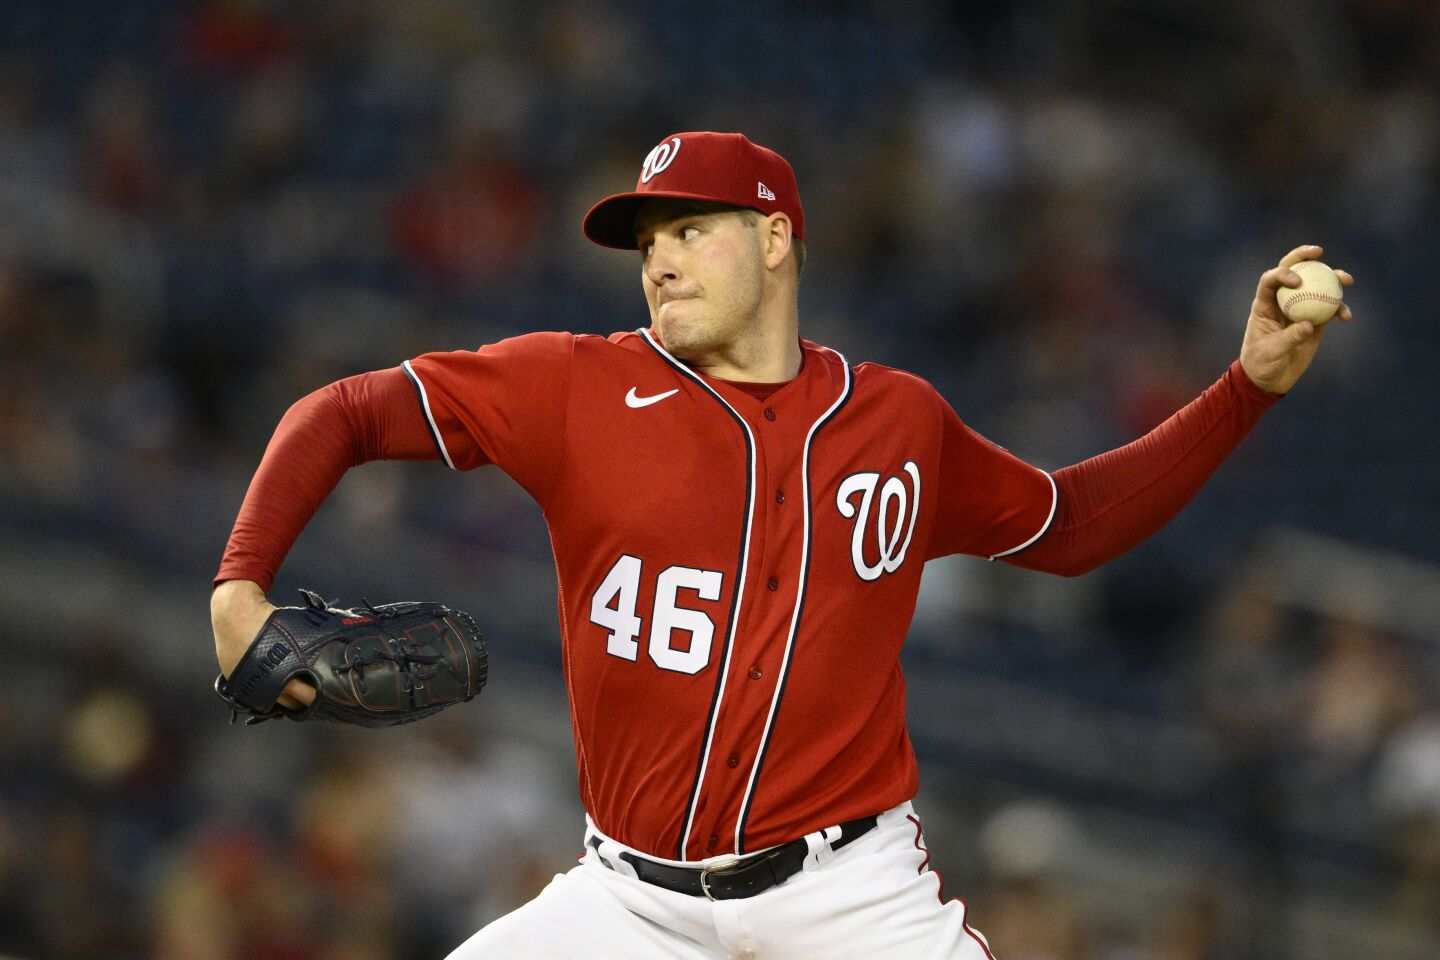 Game 4: Nationals LHP Patrick Corbin (4-16, 6.96 ERA)His 6.96 ERA among pitchers with at least 70 innings is the worst in the majors, as are his 16 losses and 167 hits allowed. The former Diamondback allowed eight runs in 11 1/3 innings in two starts last year against the Padres and has a 4.51 ERA in 109 2/3 career innings against San Diego.